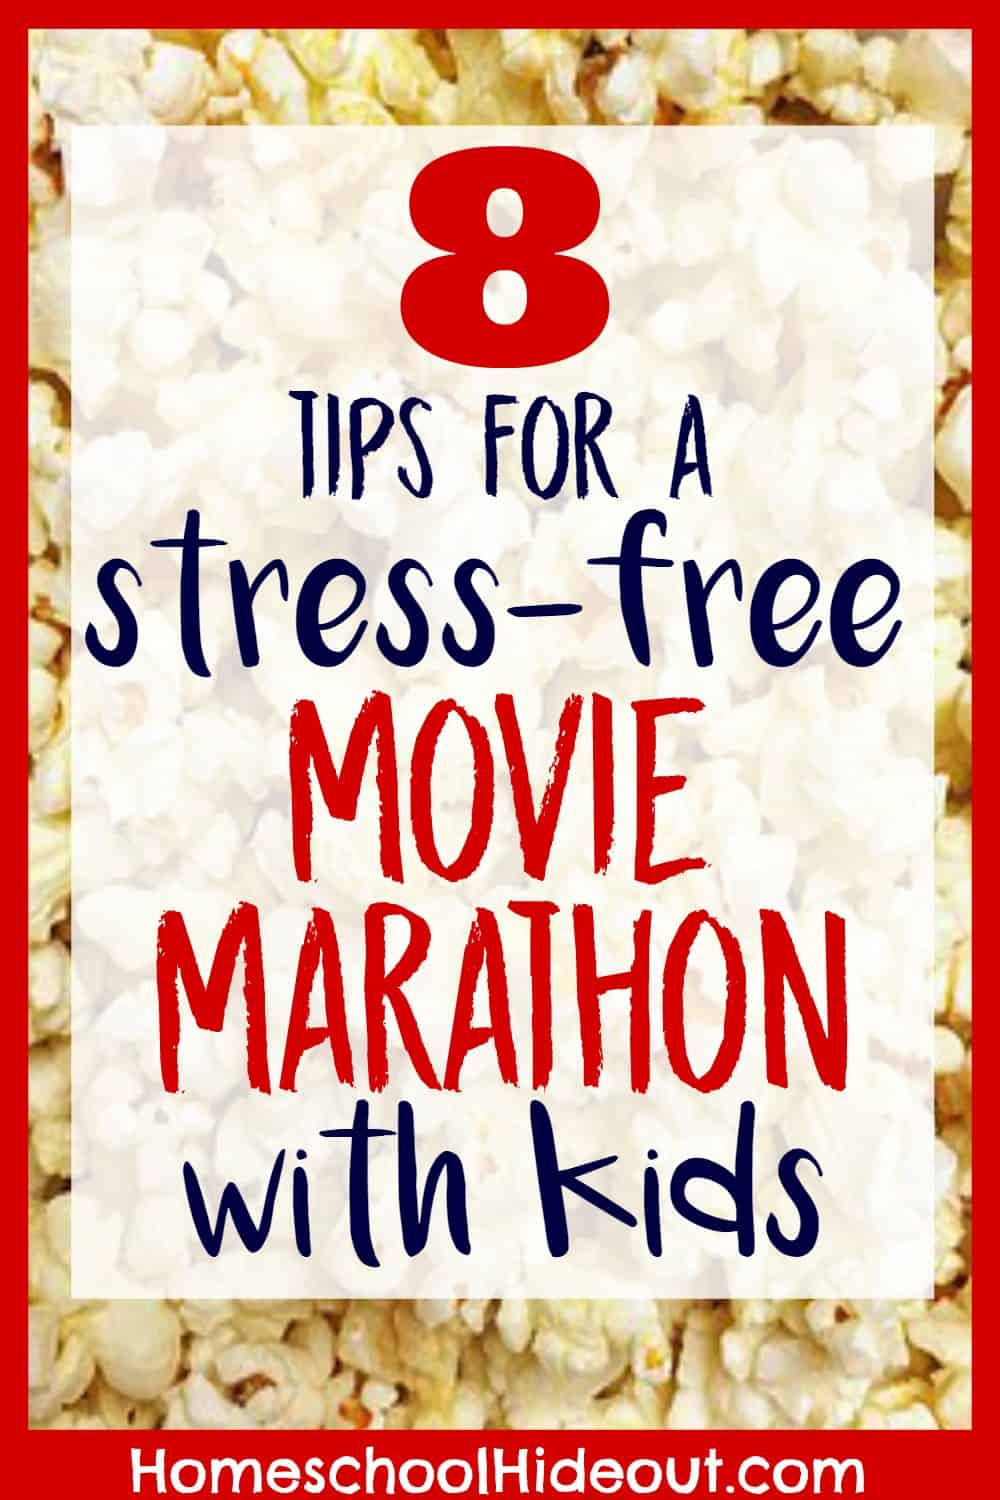 Host a stress-free movie marathon WITH KIDS with these 8 simple tips! # 4 is genius!